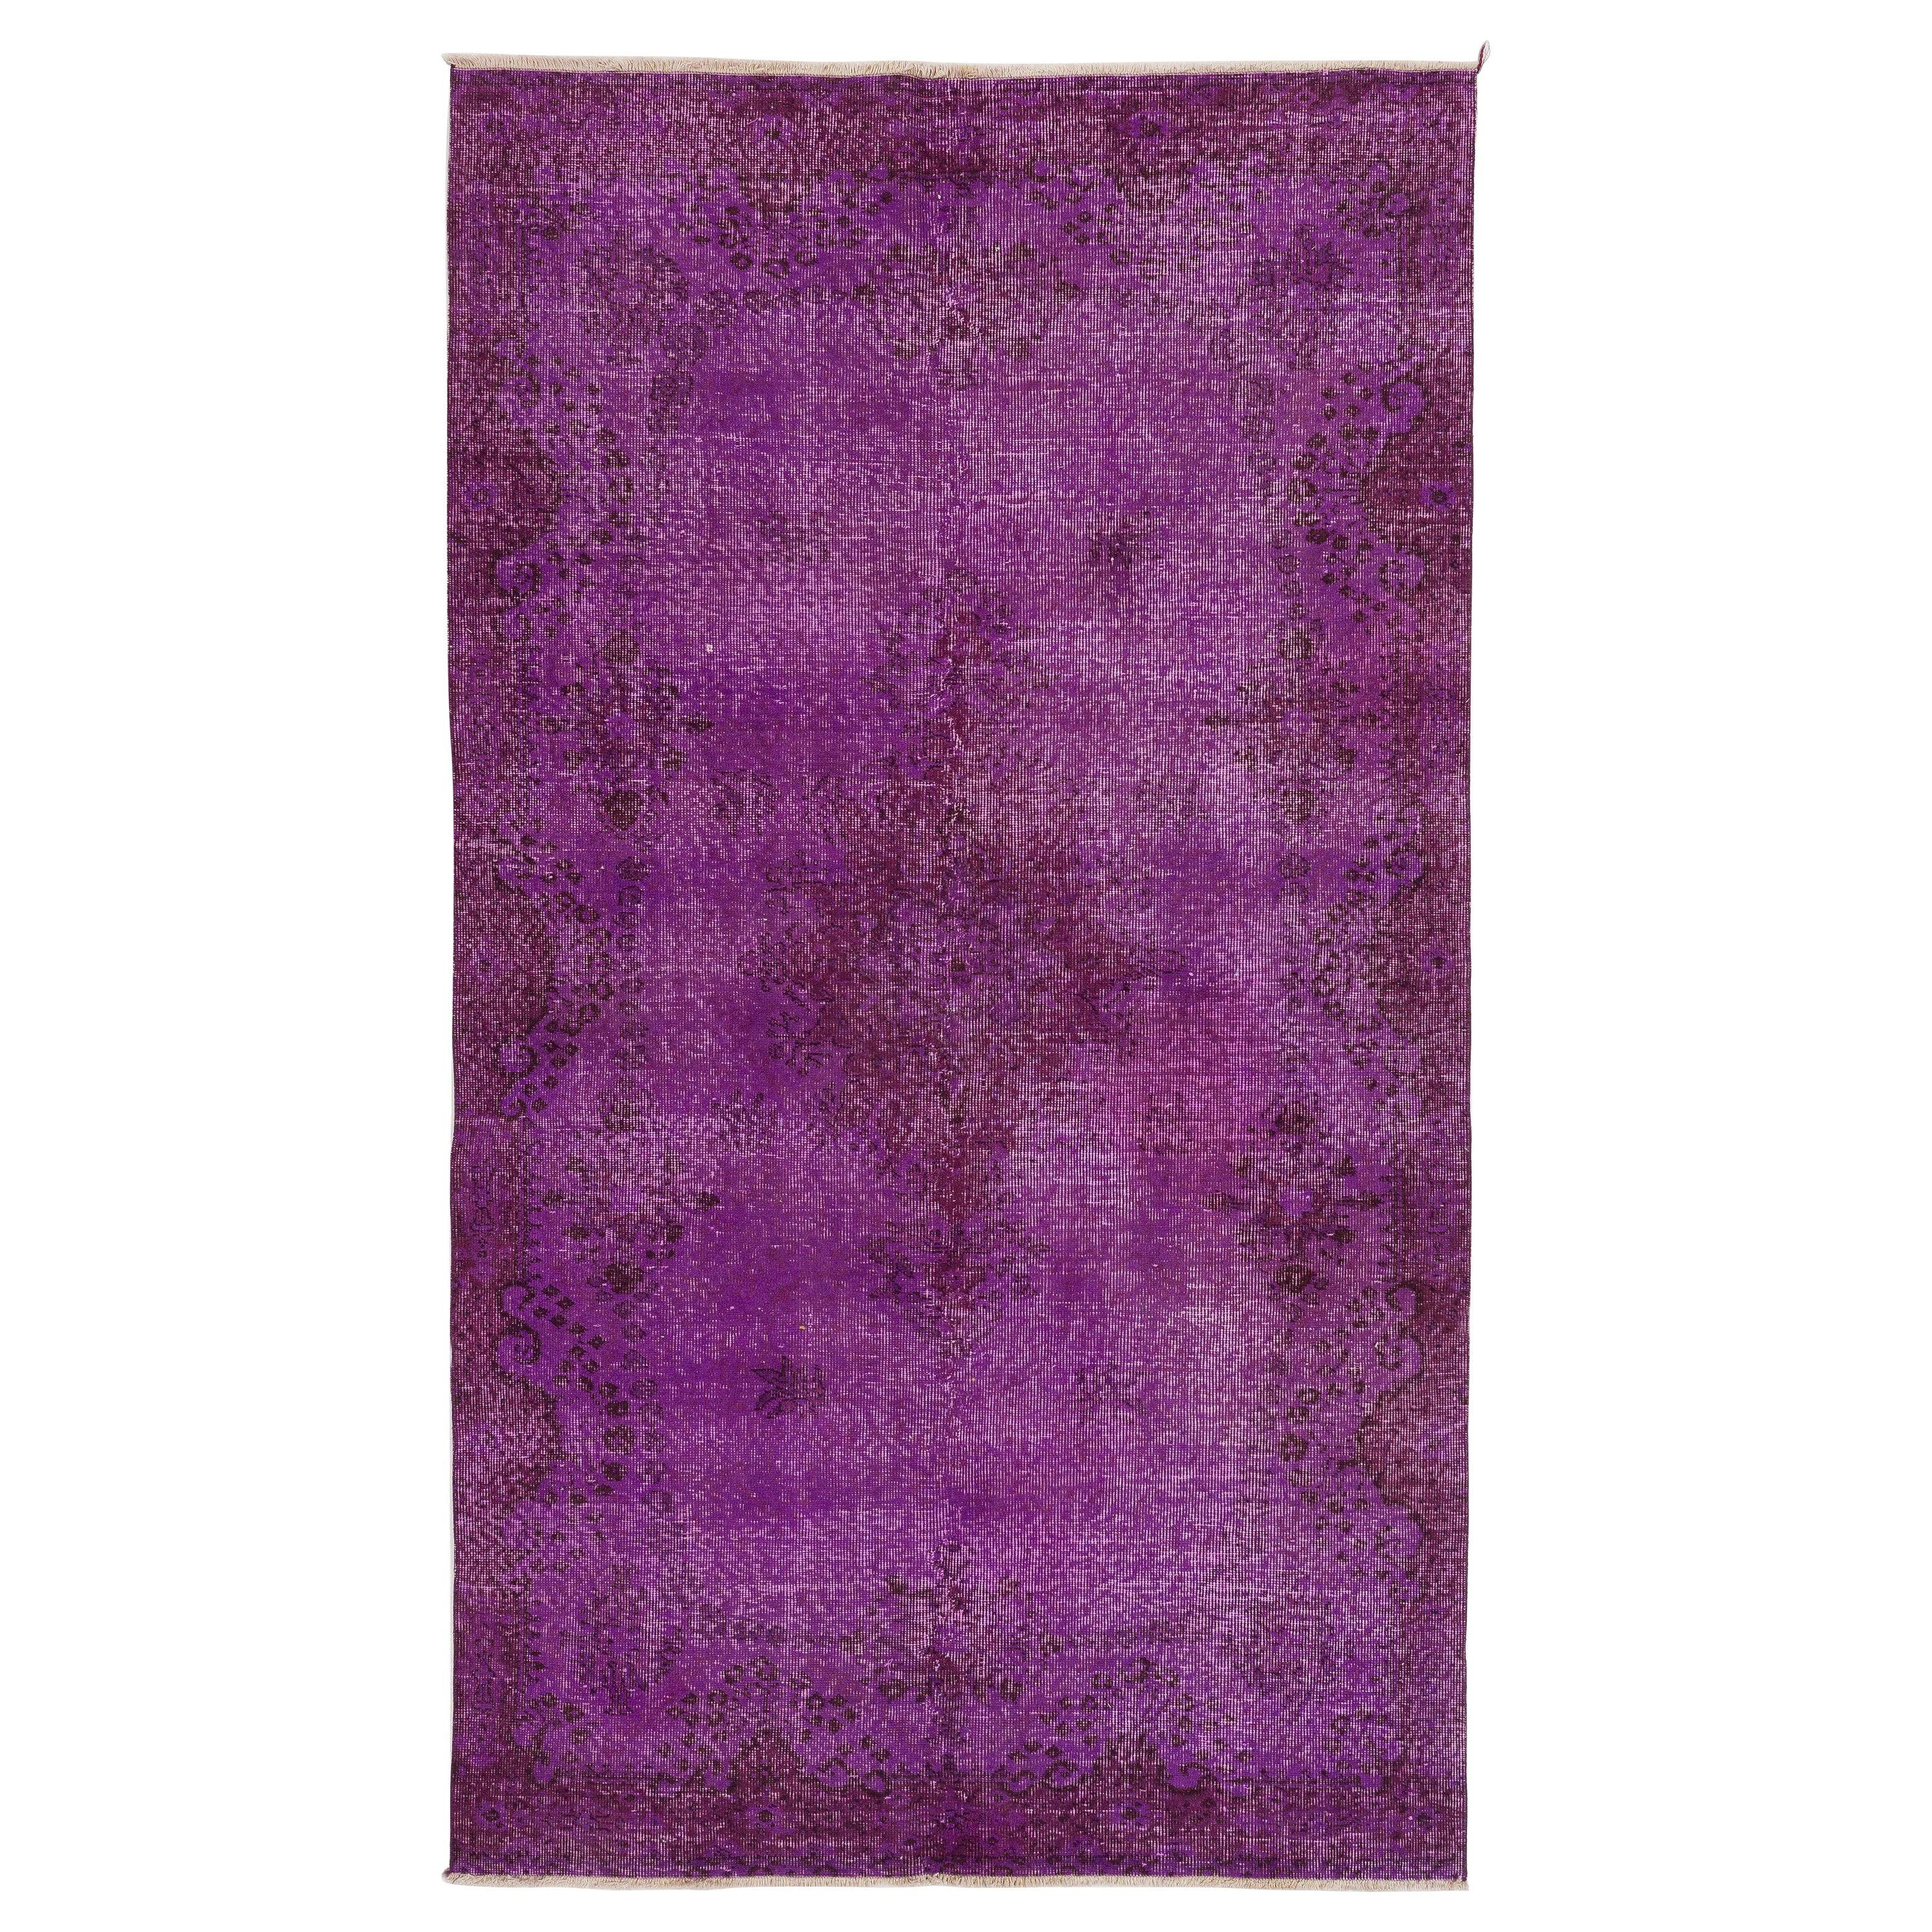 5x8.7 Ft Modern Area Rug in Purple. Hand-Knotted in Turkey. Vintage Wool Carpet